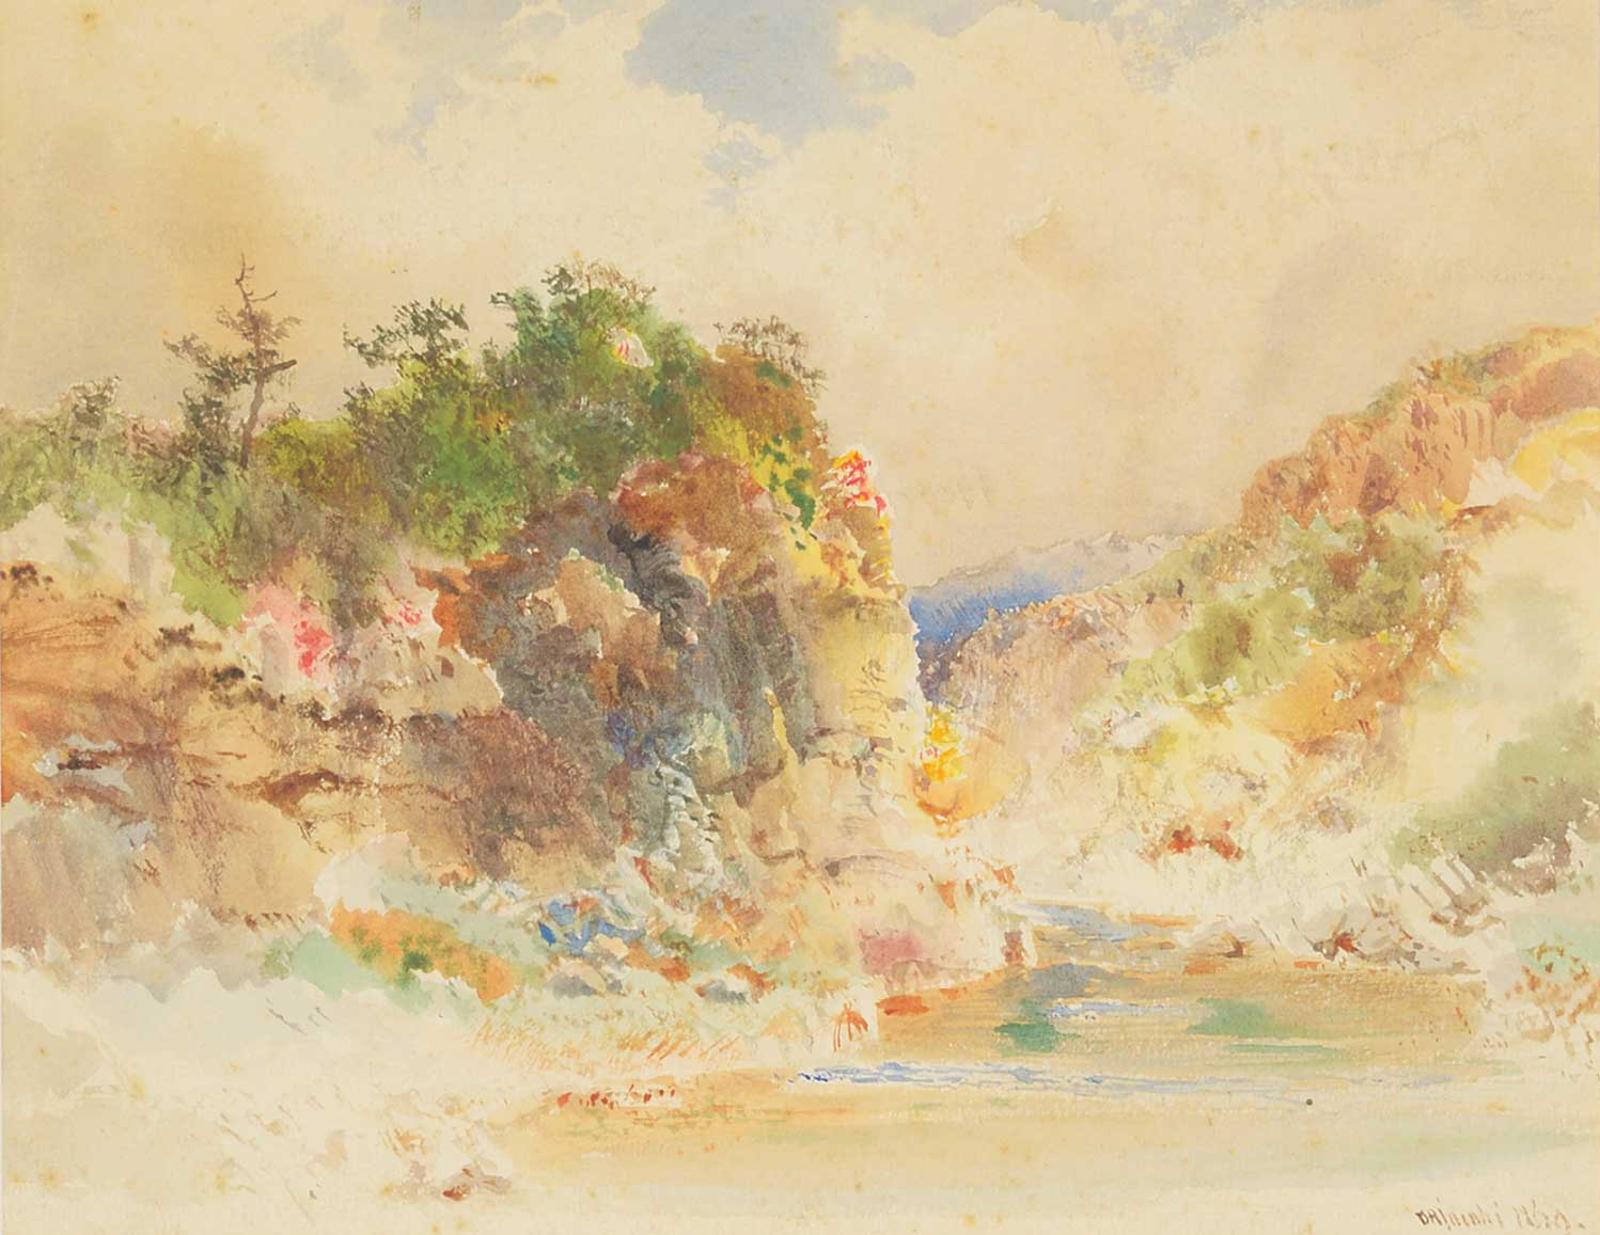 Otto Rheinhold Jacobi (1812-1901) - Untitled - River in the Canyon